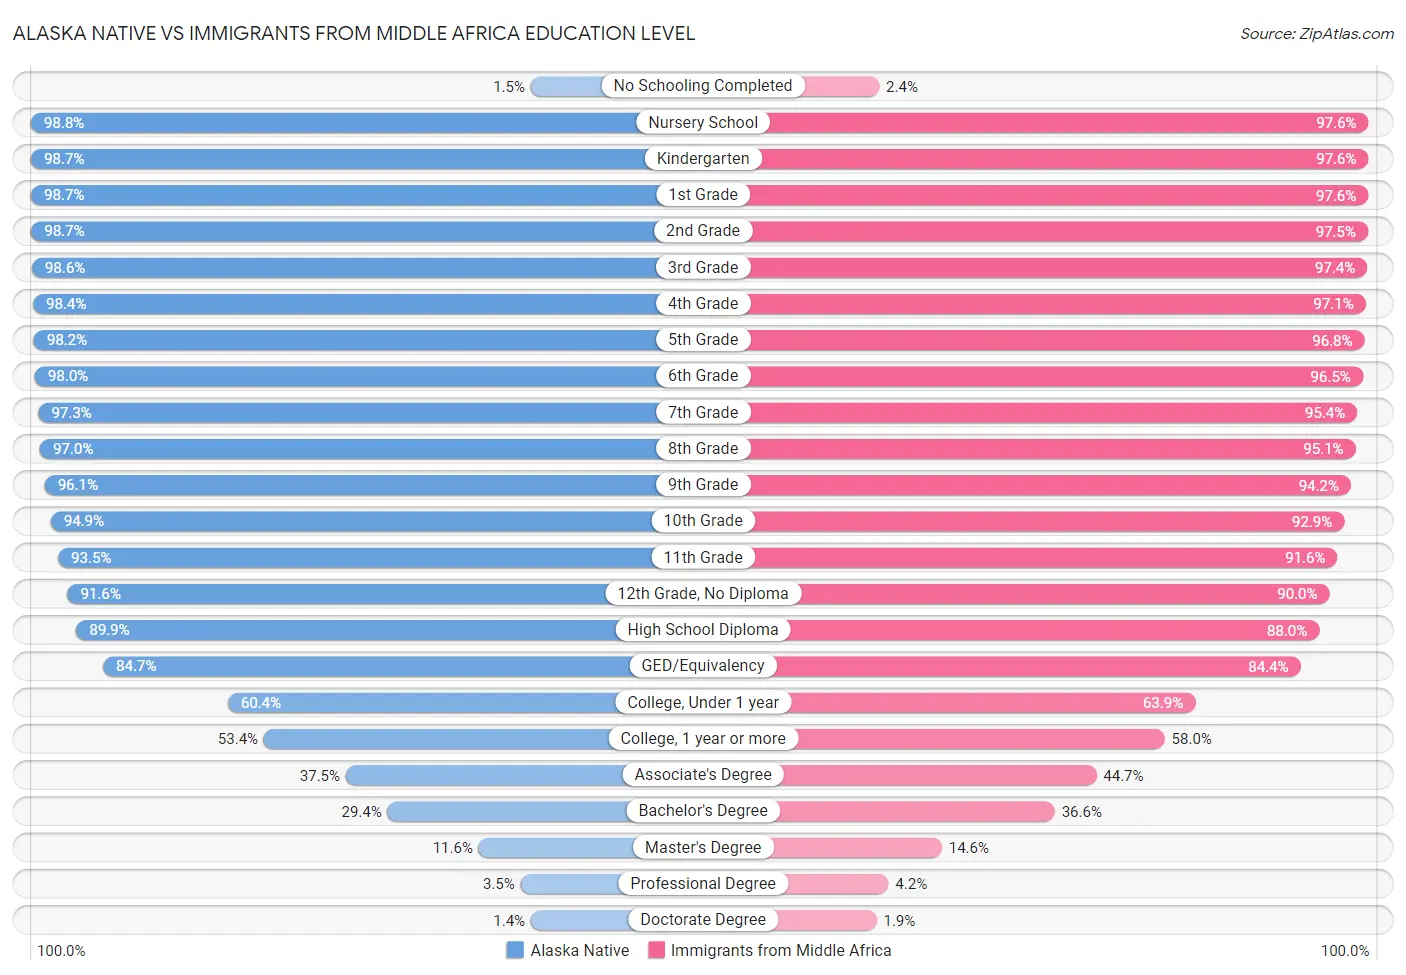 Alaska Native vs Immigrants from Middle Africa Education Level